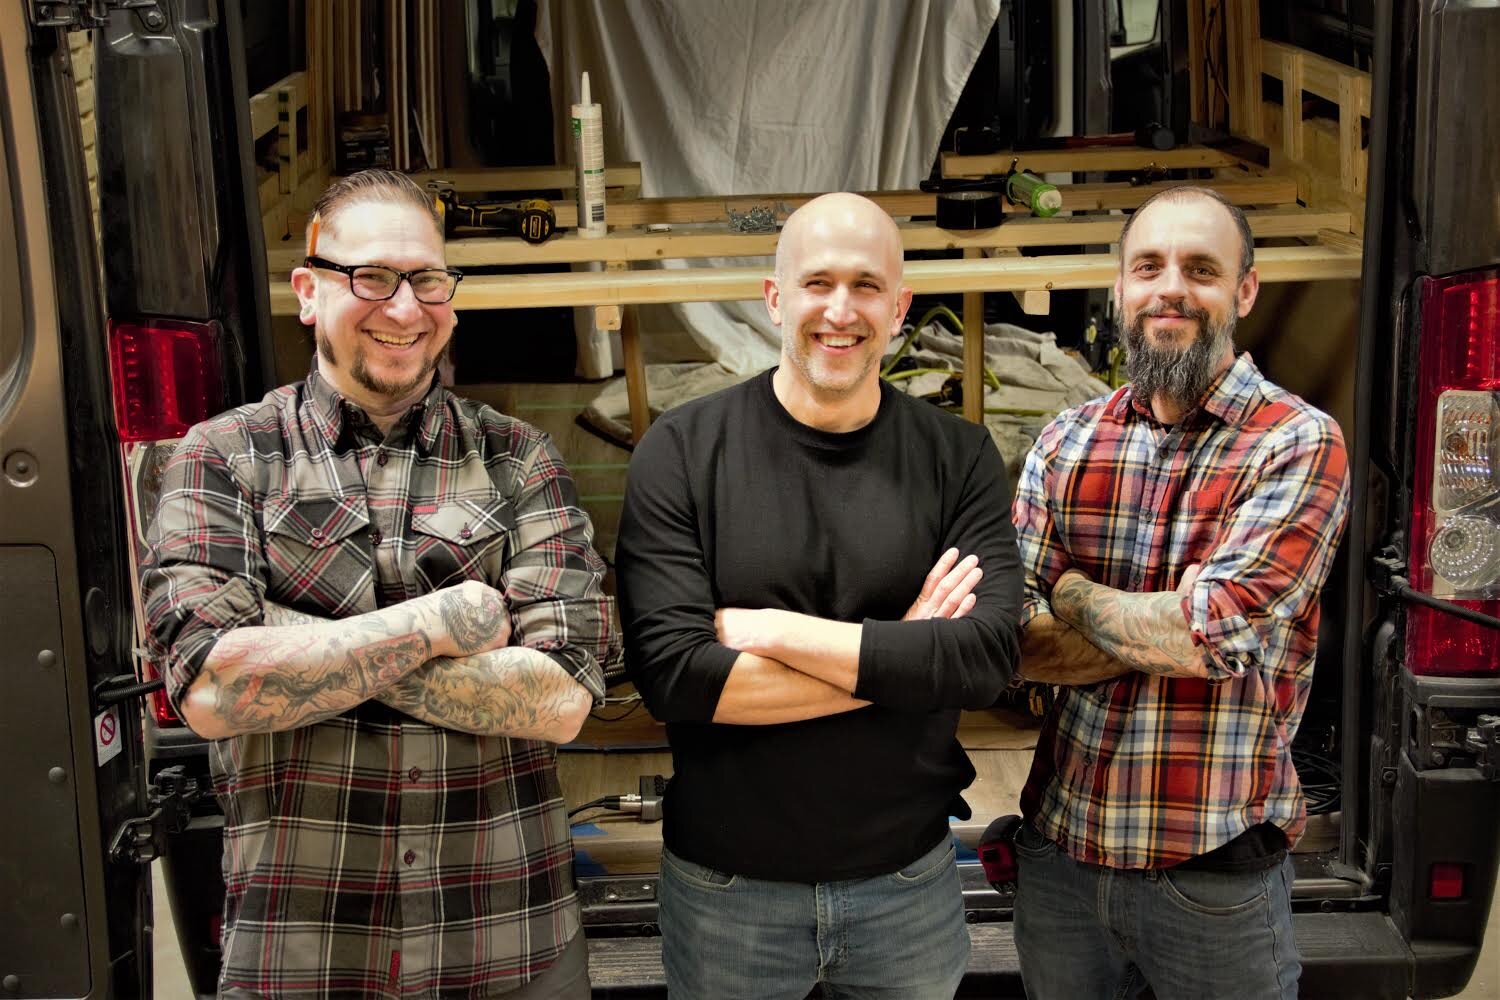 Drifter Vans co-owner/lead builder Kyle Silvey, left, co-owner/design consultant Paul Domish, center, and co-owner/lead carpenter Daren LeManski pose in front of a conversion project. Courtesy photo.